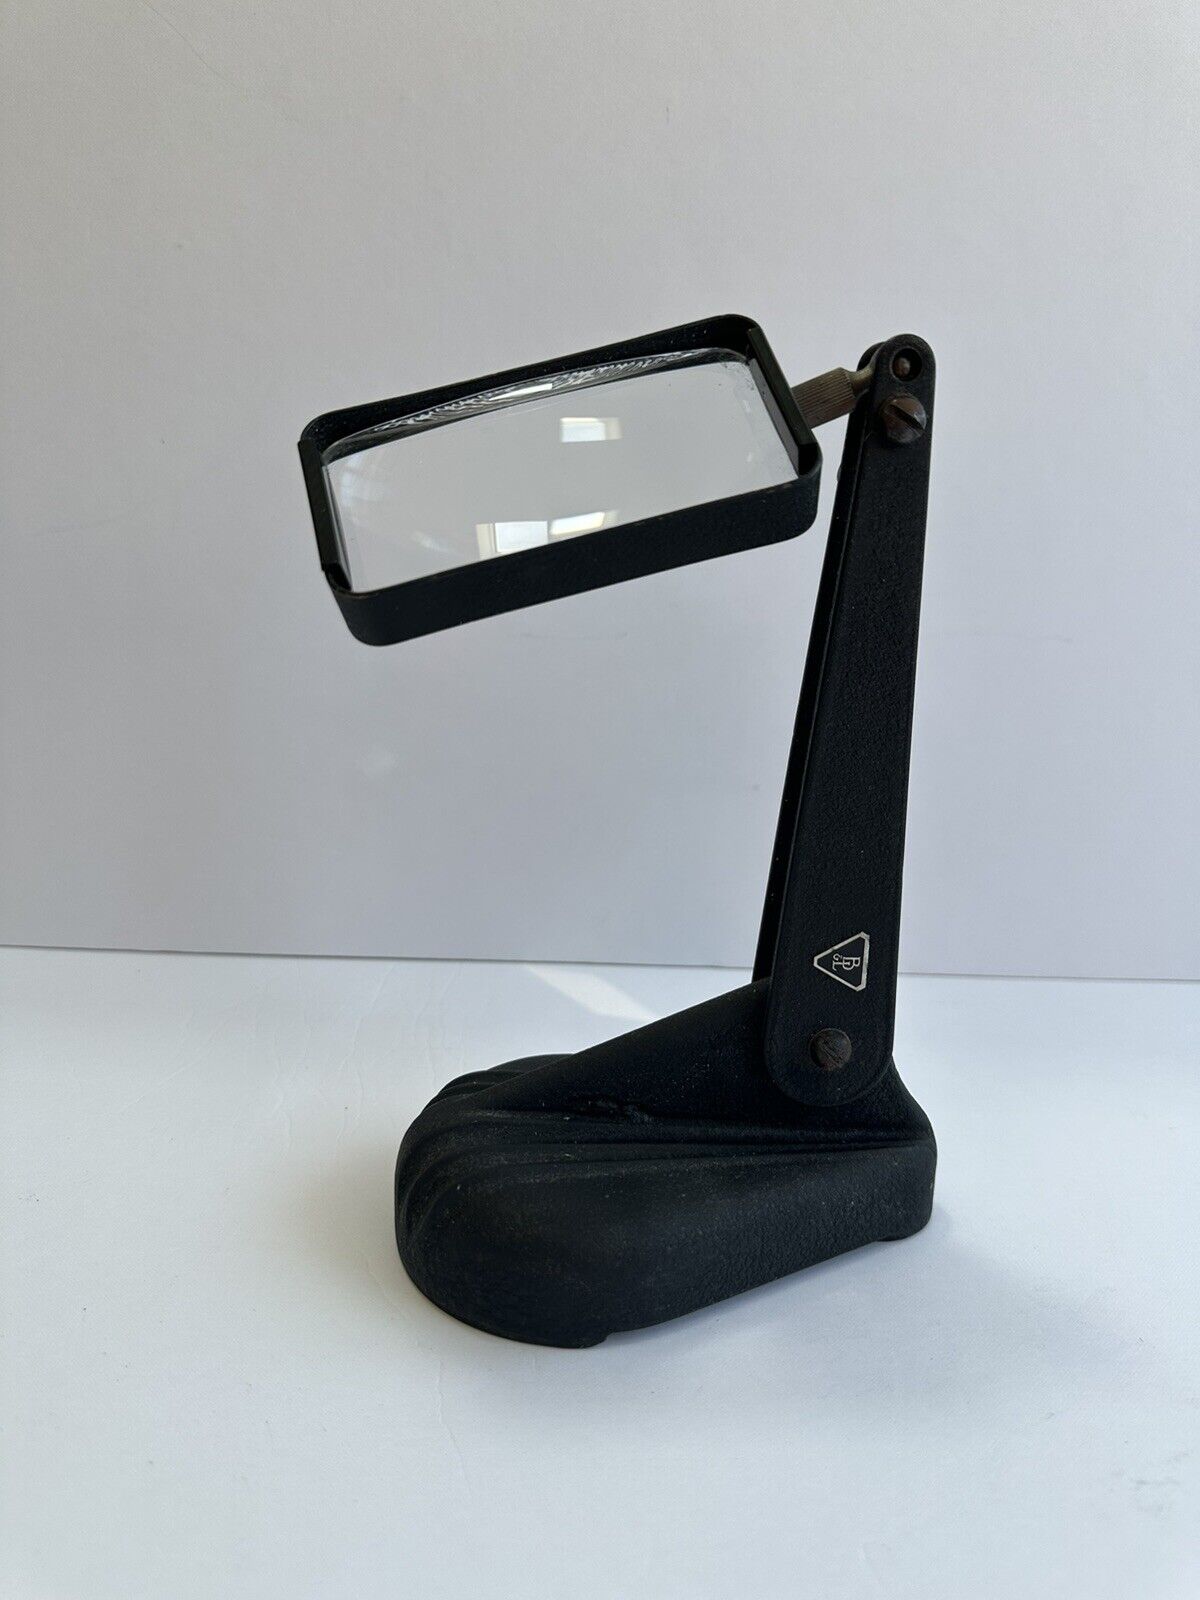 Bausch and Lomb Adjustable Desk Magnifying Glass Stand/ Vintage